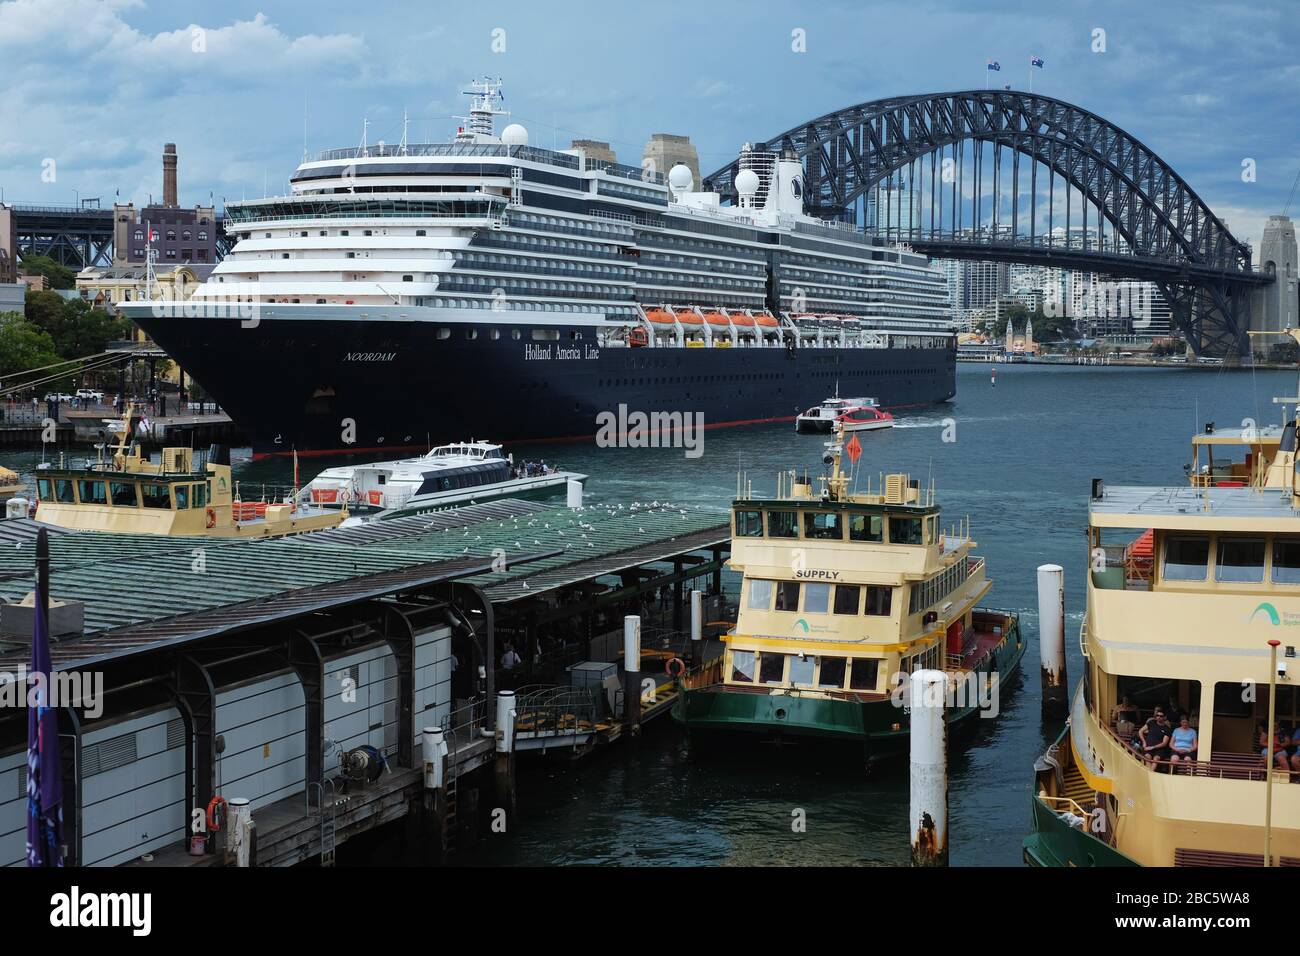 Noordam, Holland America Line cruise ship moored at the Overseas Passenger Terminal, Circular Quay Sydney during the Corona-19 pandemic, 26 February 20 Stock Photo